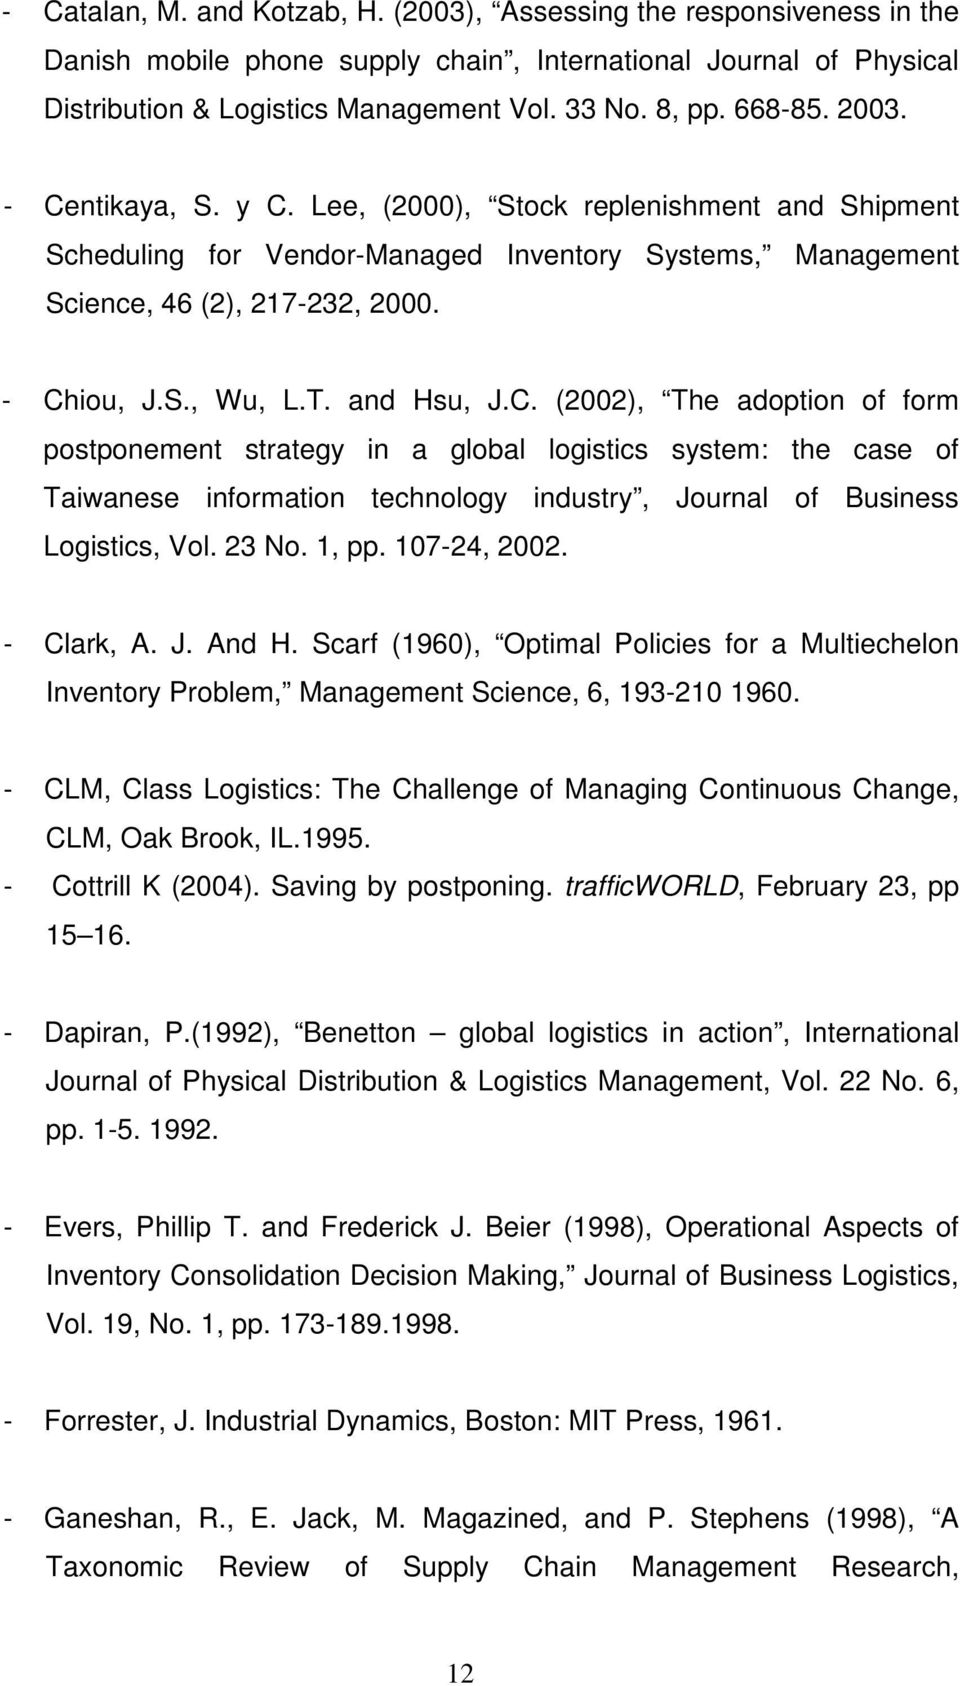 and Hsu, J.C. (2002), The adoption of form postponement strategy in a global logistics system: the case of Taiwanese information technology industry, Journal of Business Logistics, Vol. 23 No. 1, pp.